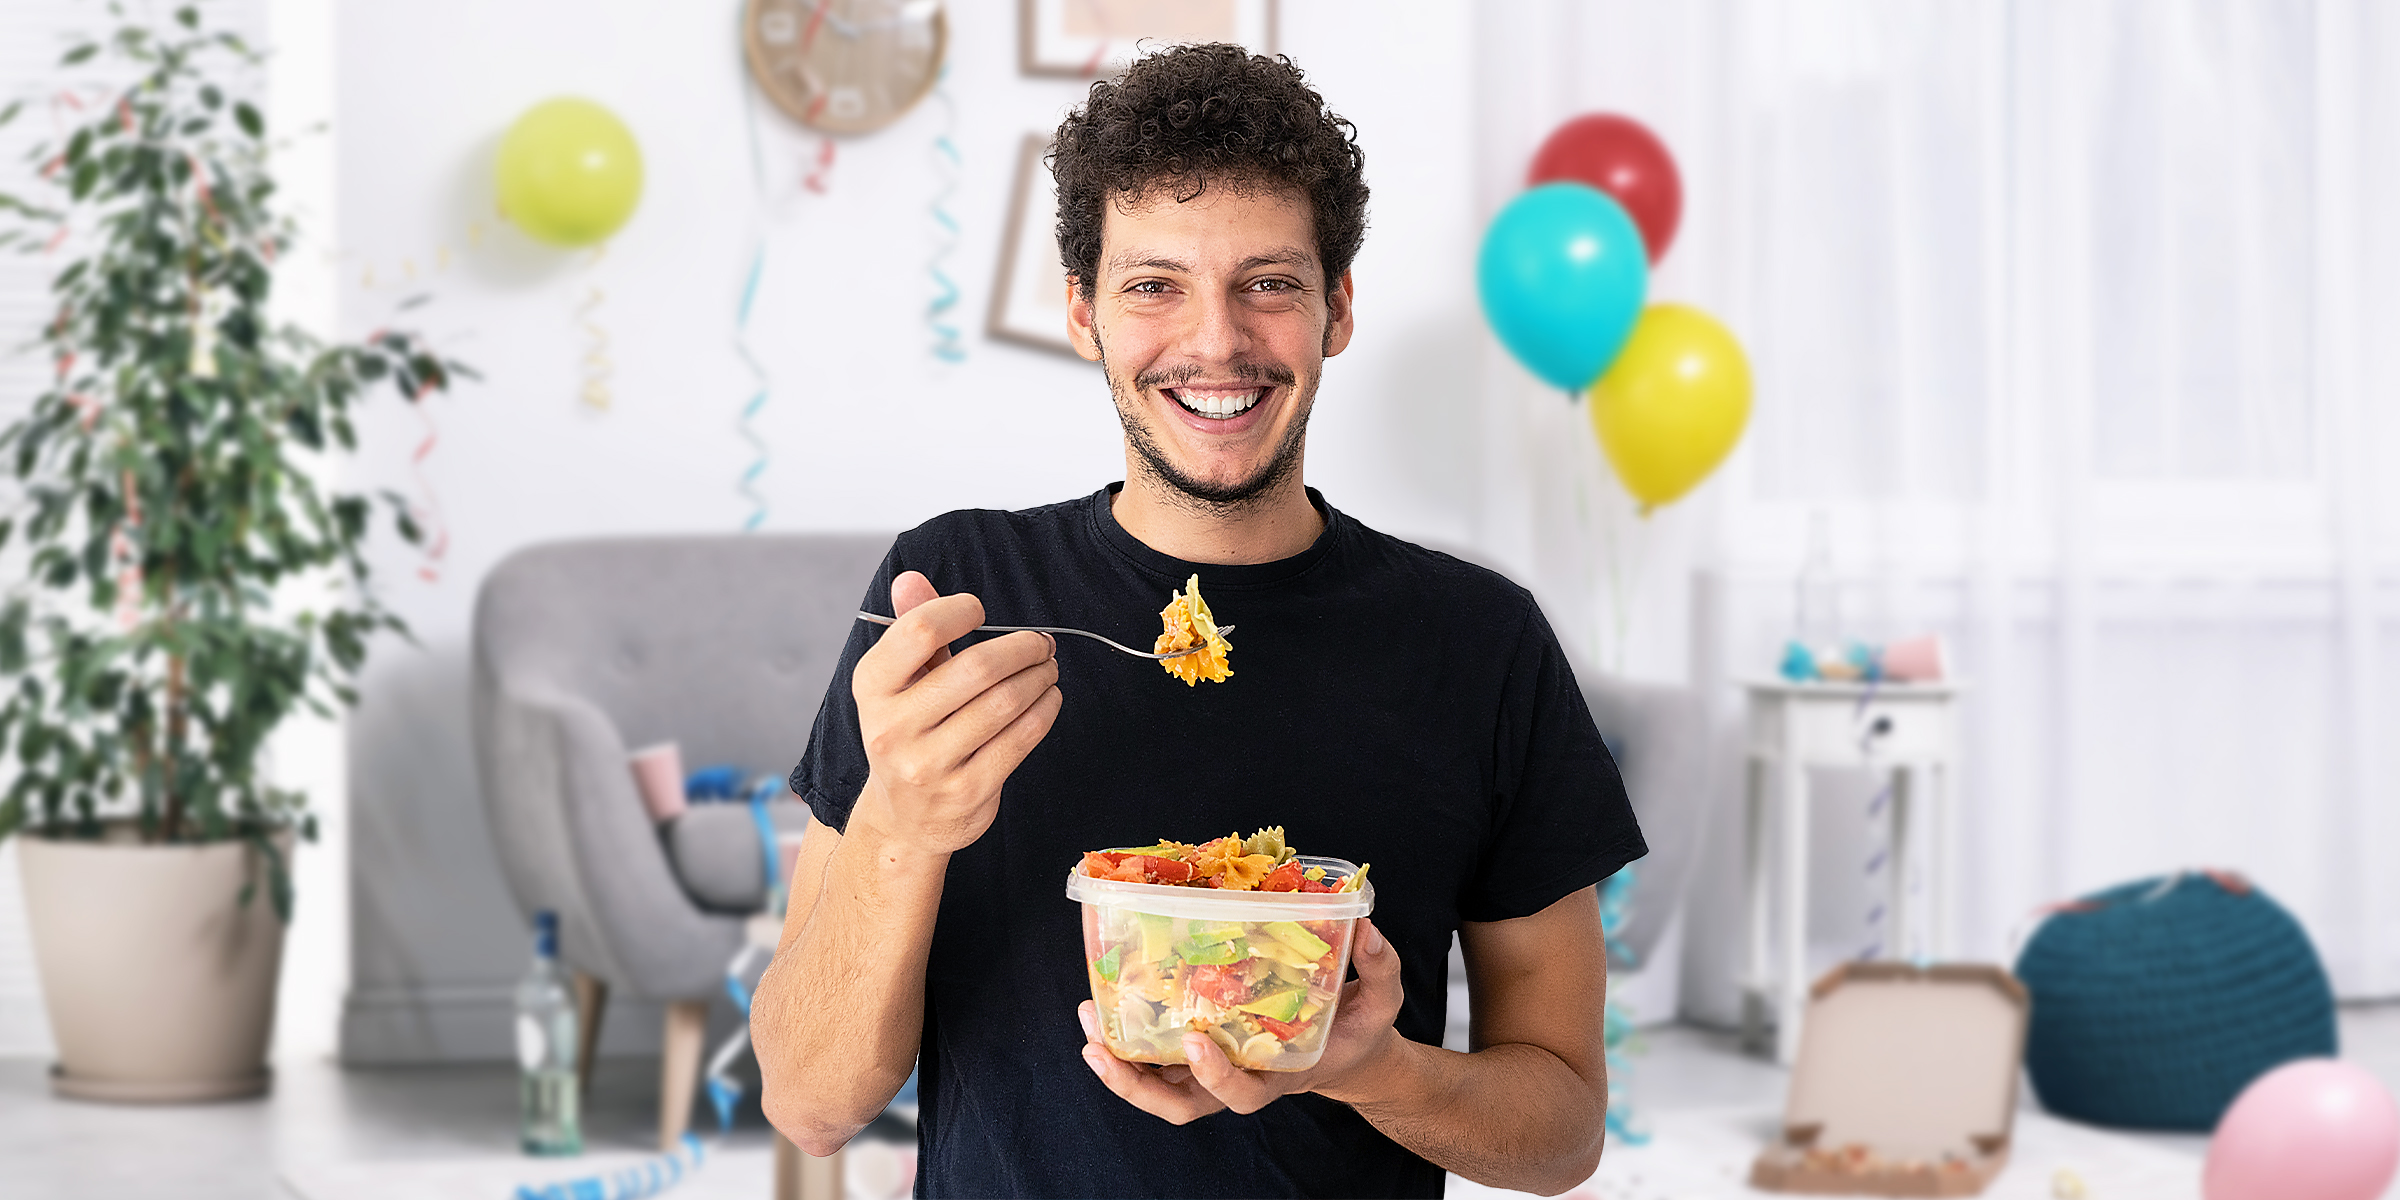 A man eating from a Tupperware | Source: Shutterstock